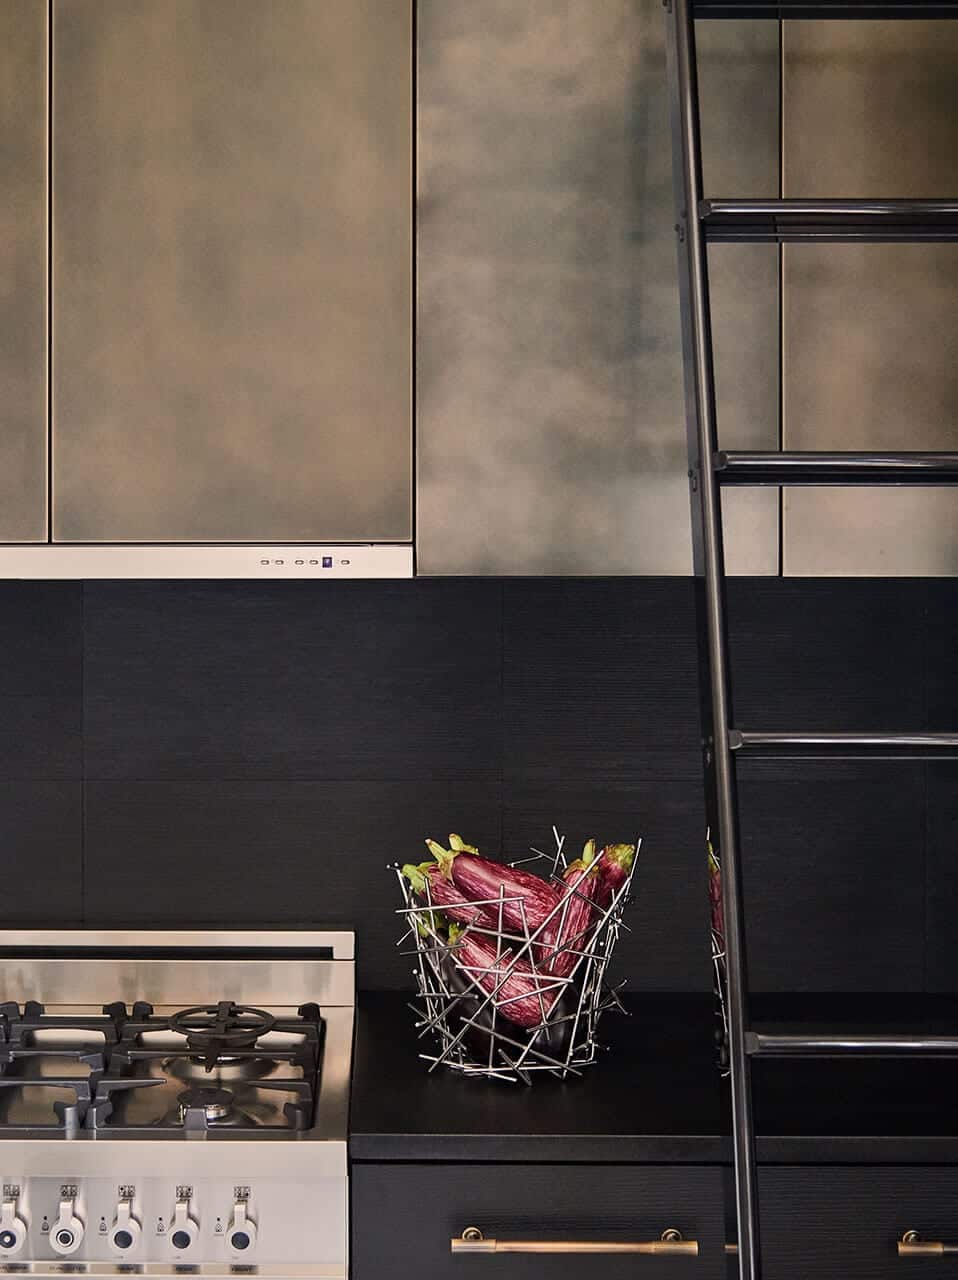 Chic contemporary kitchen with dark, moody finishes utilizes a black lacquer rolling ladder to reach the cabinets.